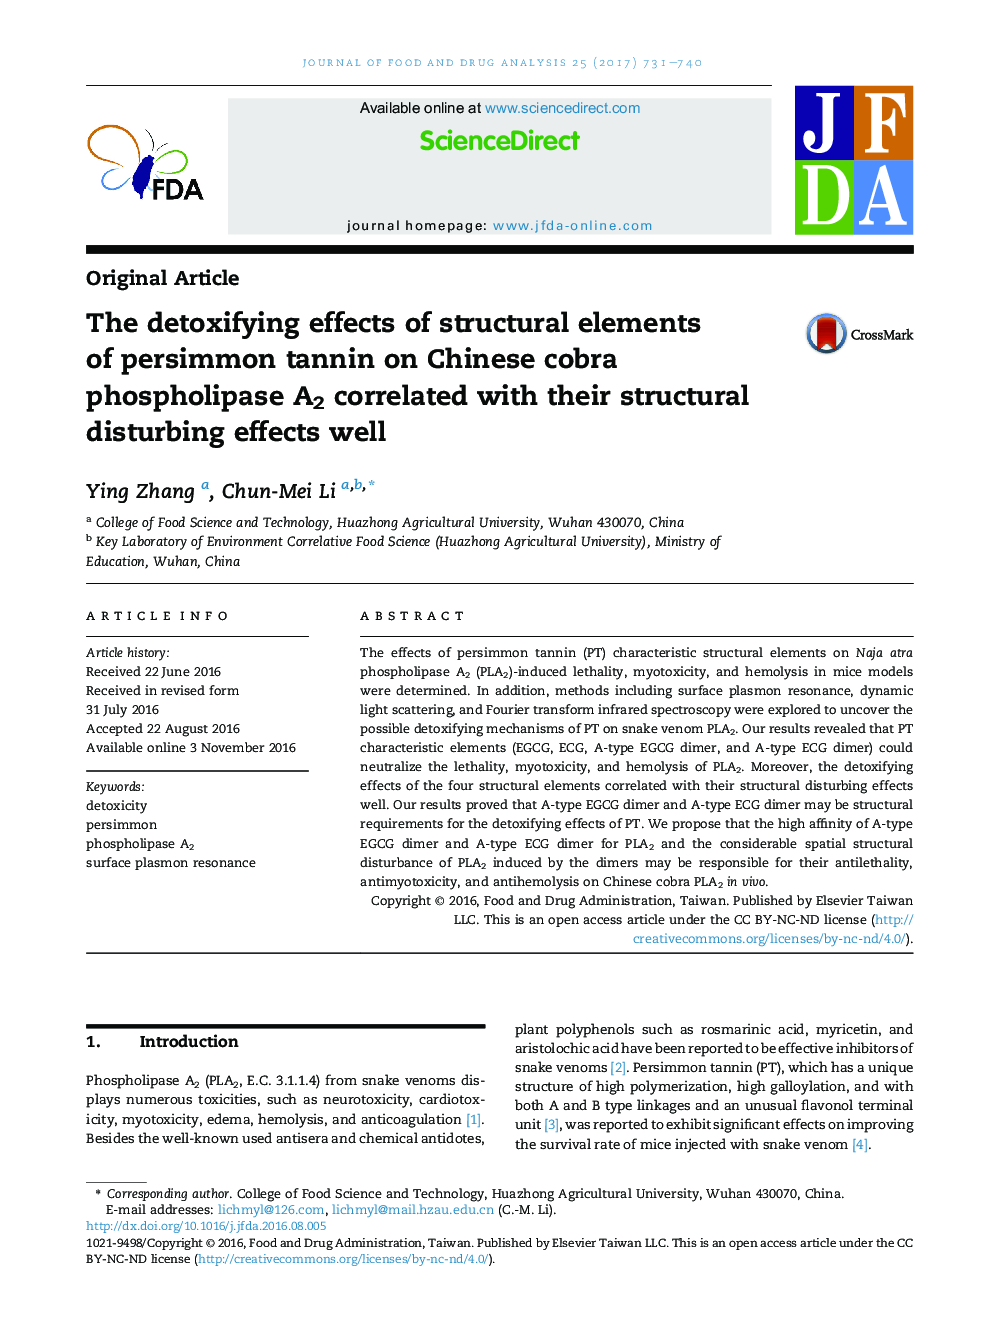 The detoxifying effects of structural elements ofÂ persimmon tannin on Chinese cobra phospholipase A2 correlated with their structural disturbing effects well